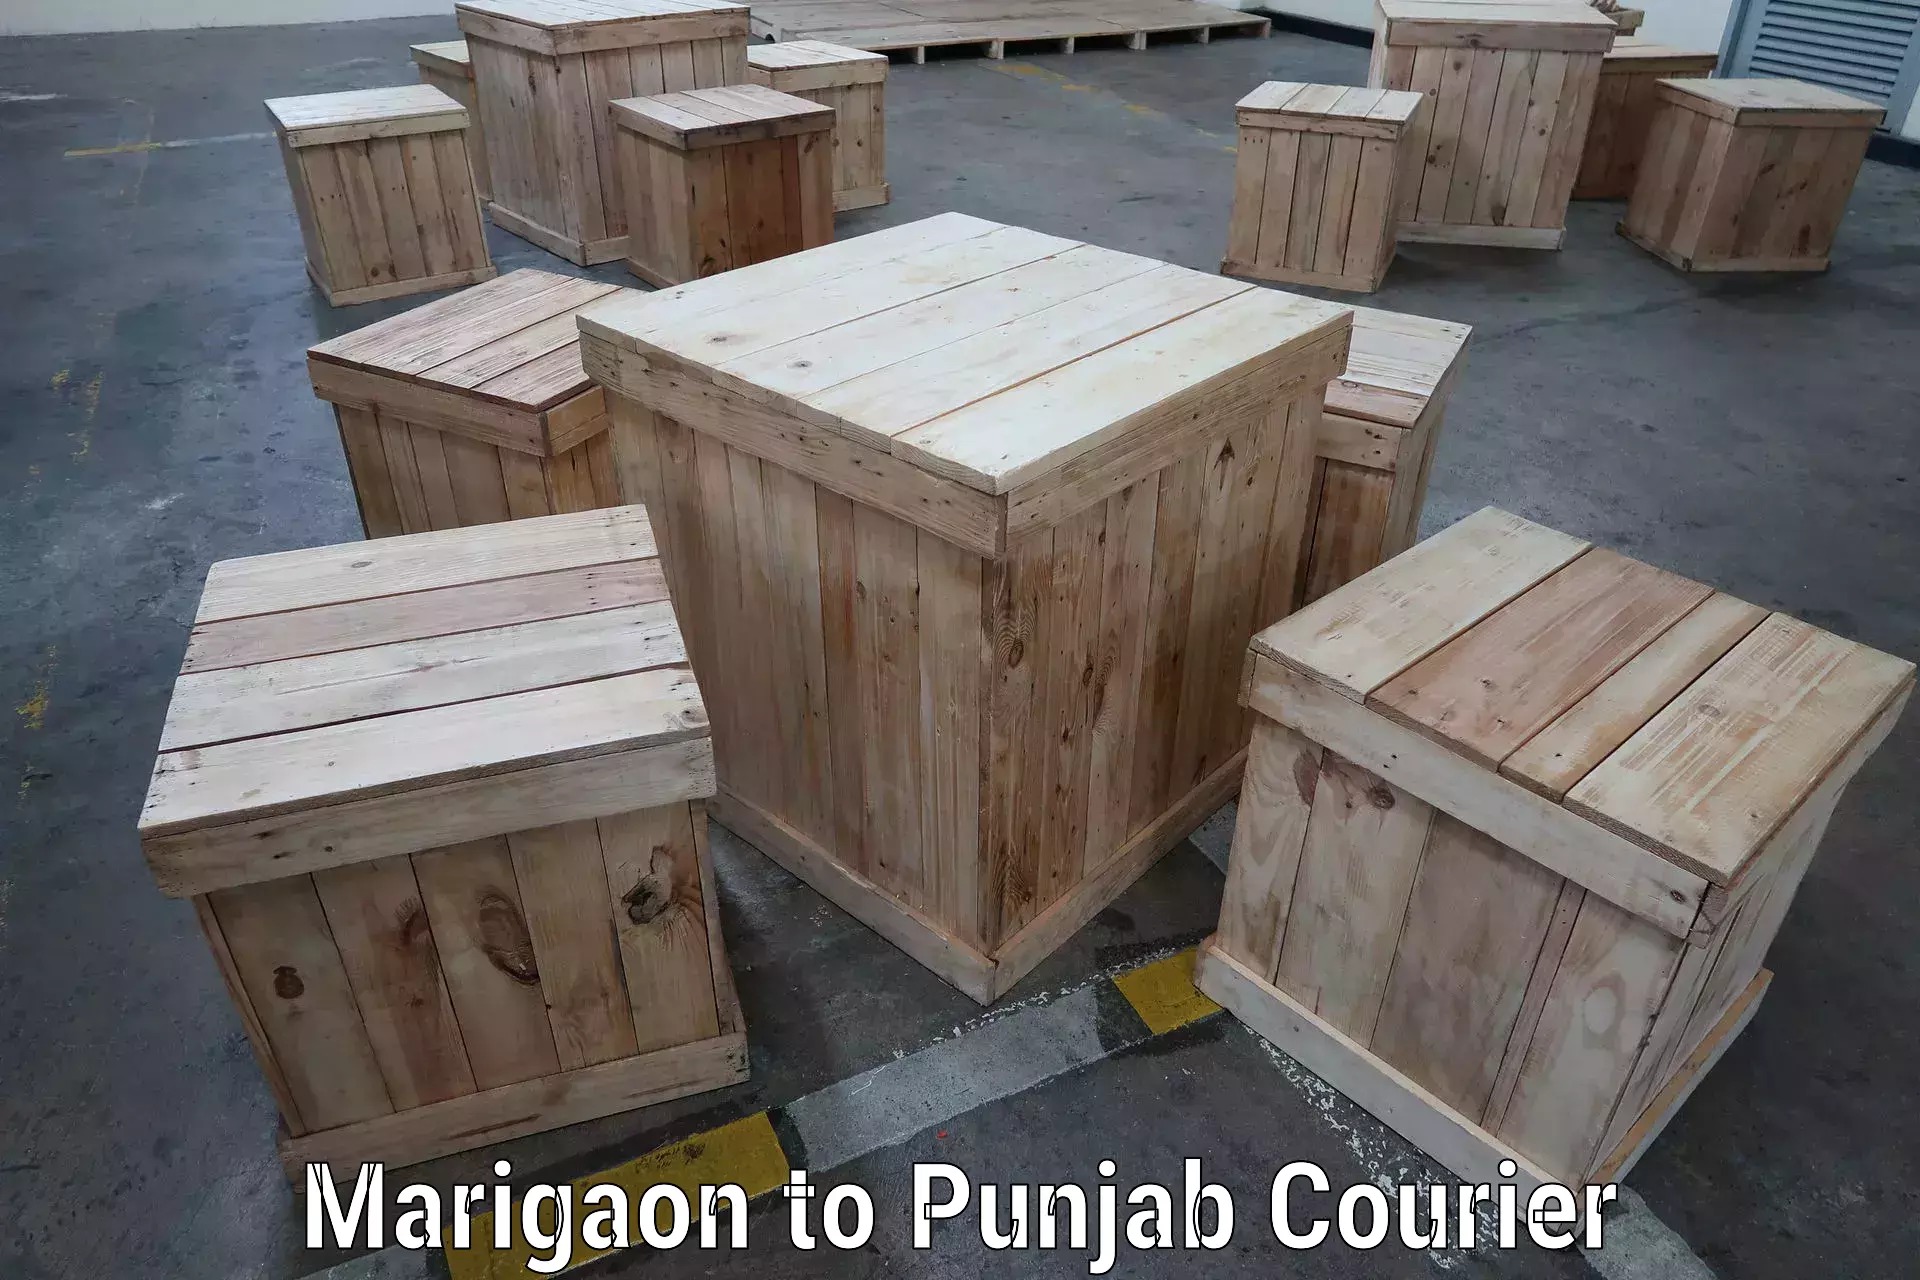 Sustainable shipping practices Marigaon to Dhuri